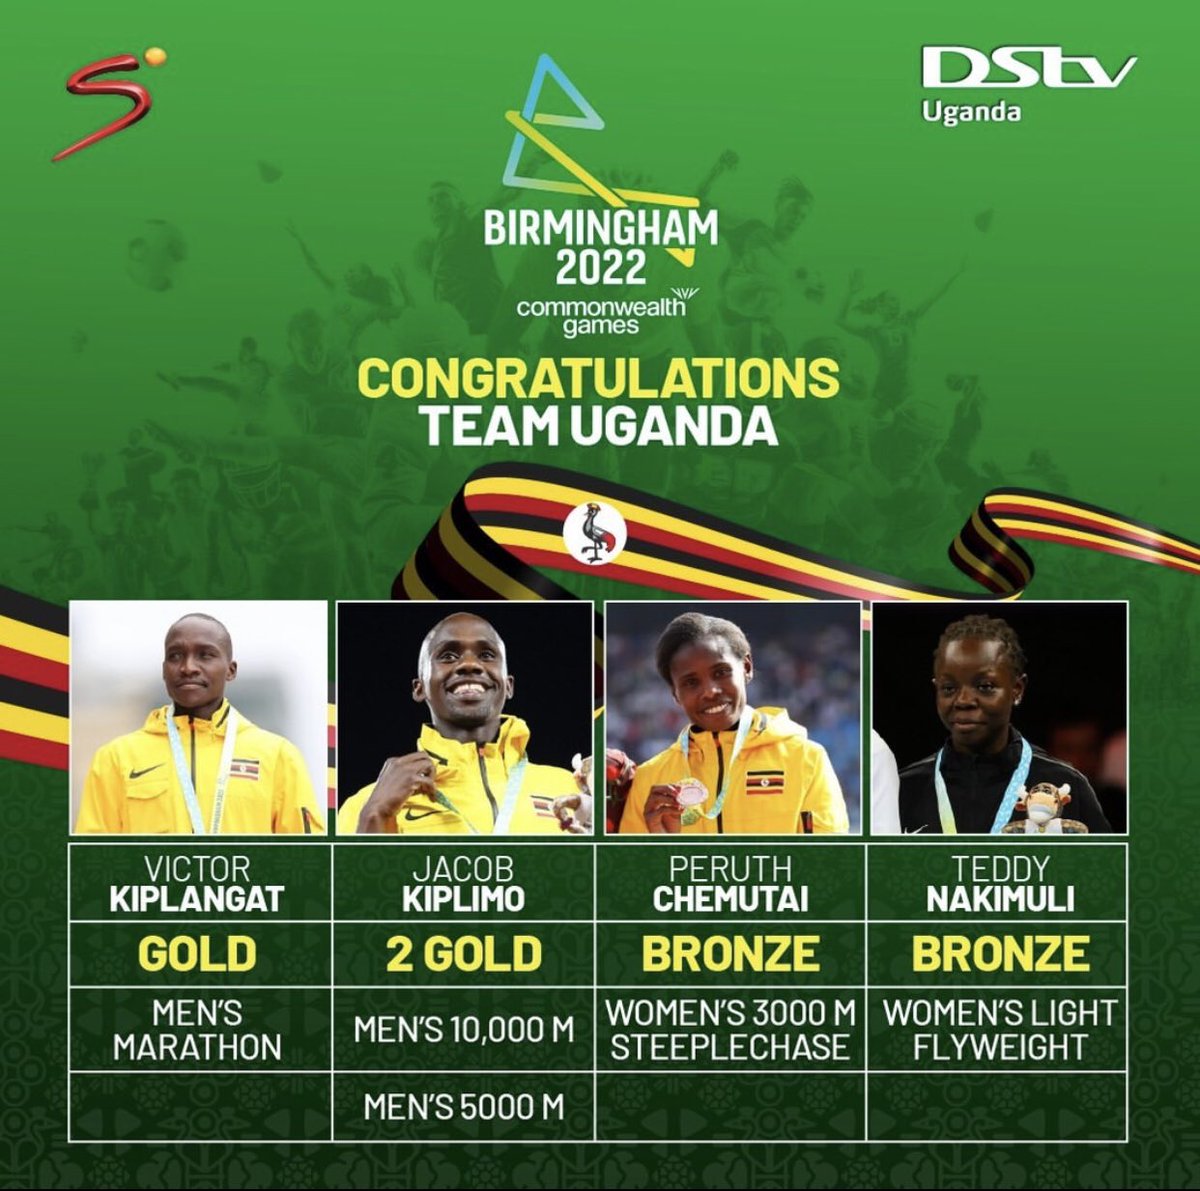 We sent out a huge team💪🏾
They all showed up big time.
Afew went far and beyond & were the best from the rest
Congratulations to our medalists at the #CommonwealthGames22 
Caught mine all live on the DSTV app at work, school and in the comfort of my bed 
#DstvAppOnTheGo #B2022